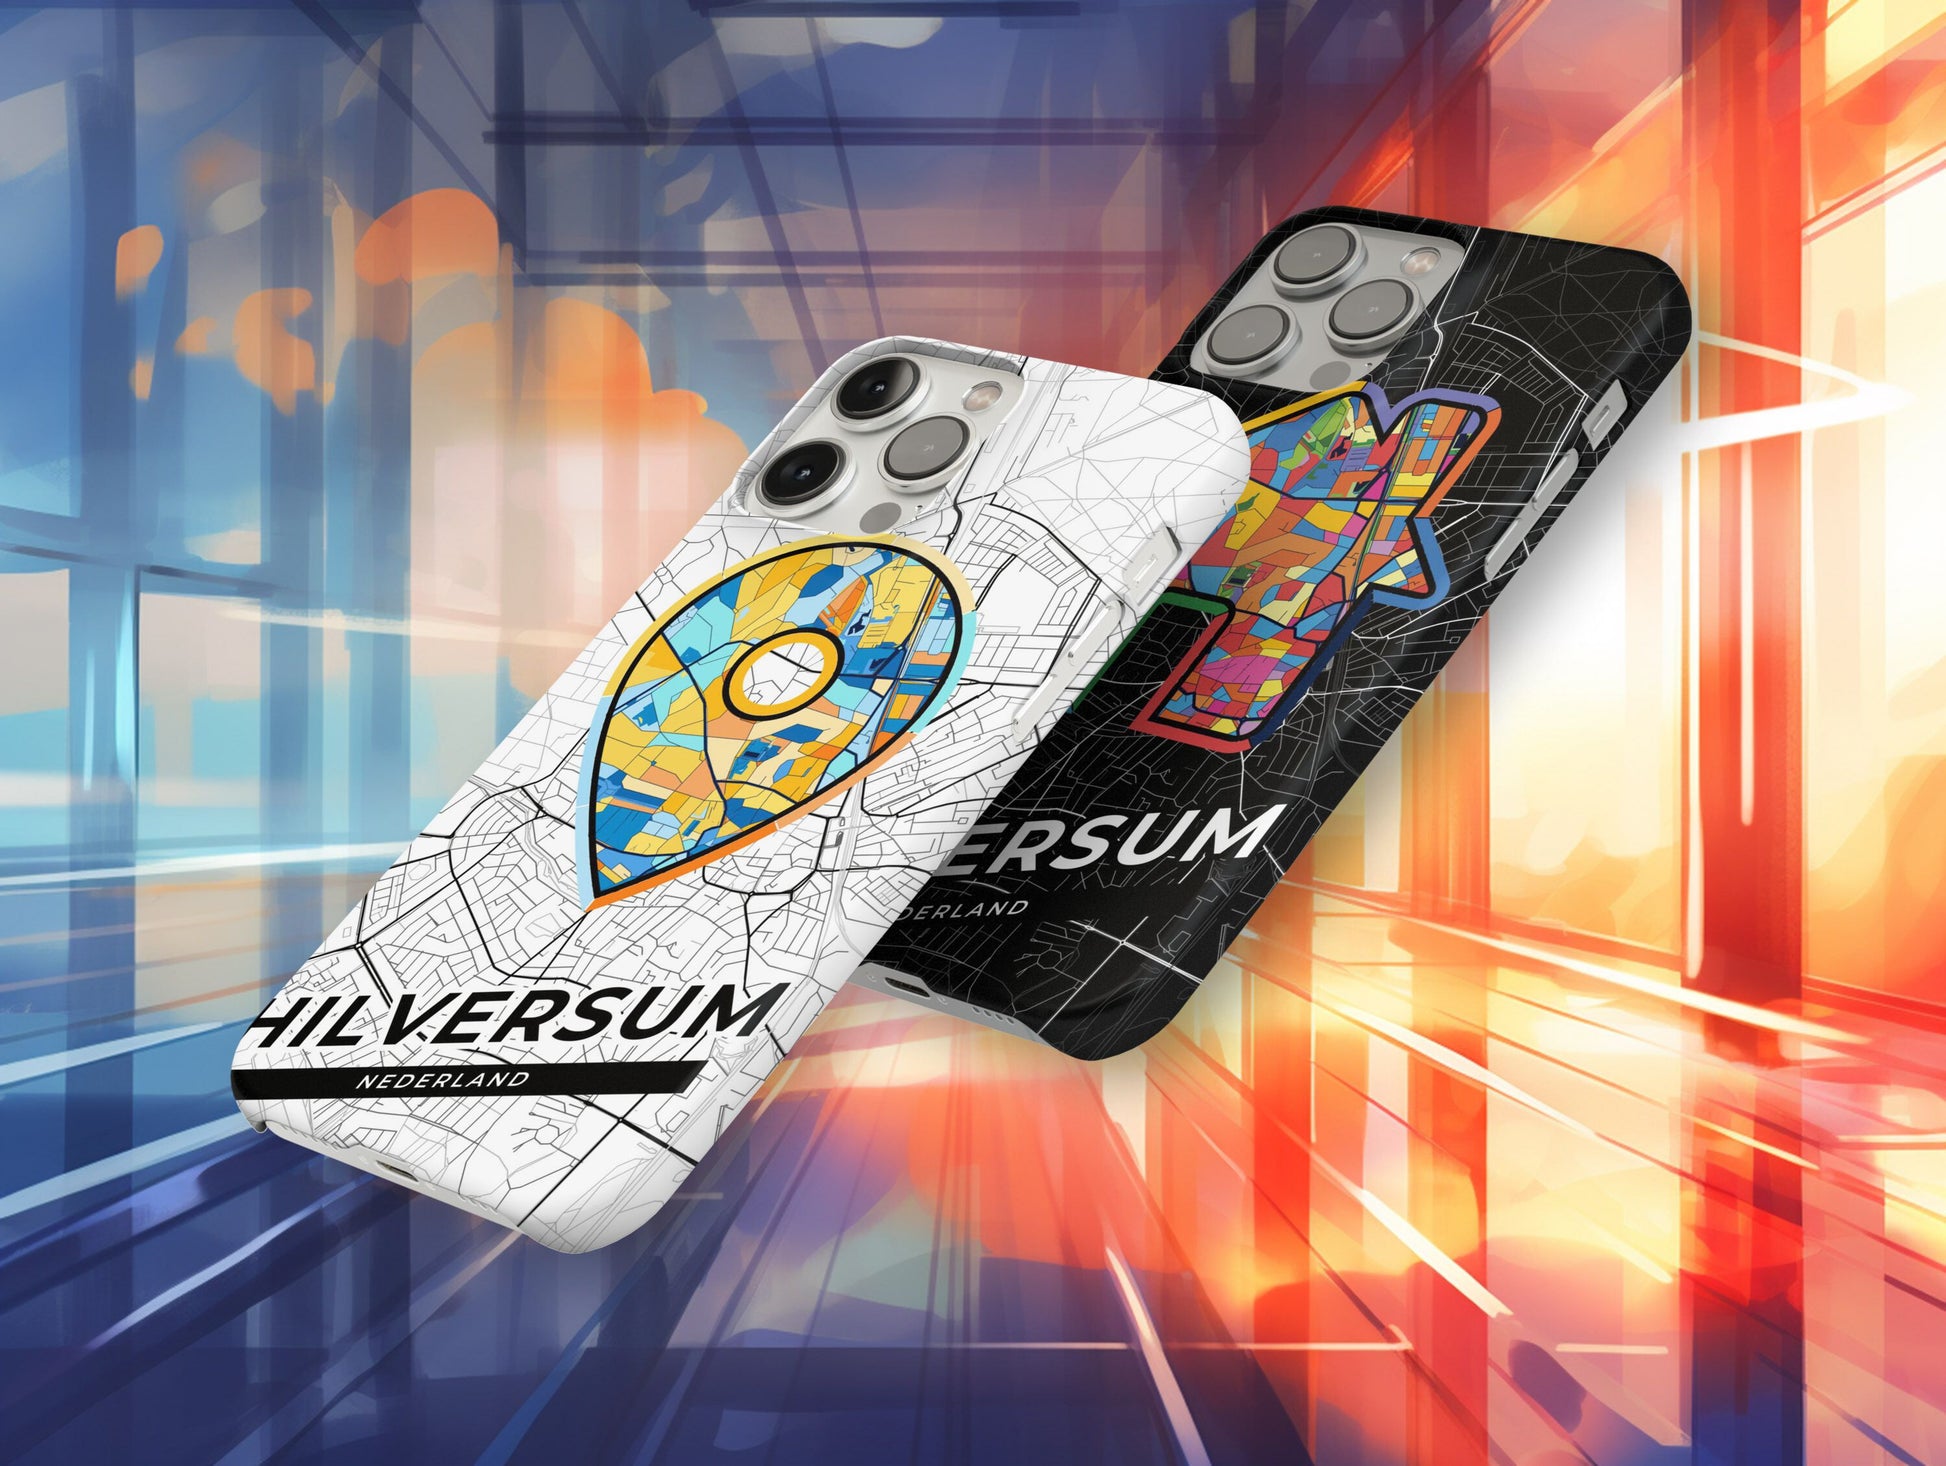 Hilversum Netherlands slim phone case with colorful icon. Birthday, wedding or housewarming gift. Couple match cases.